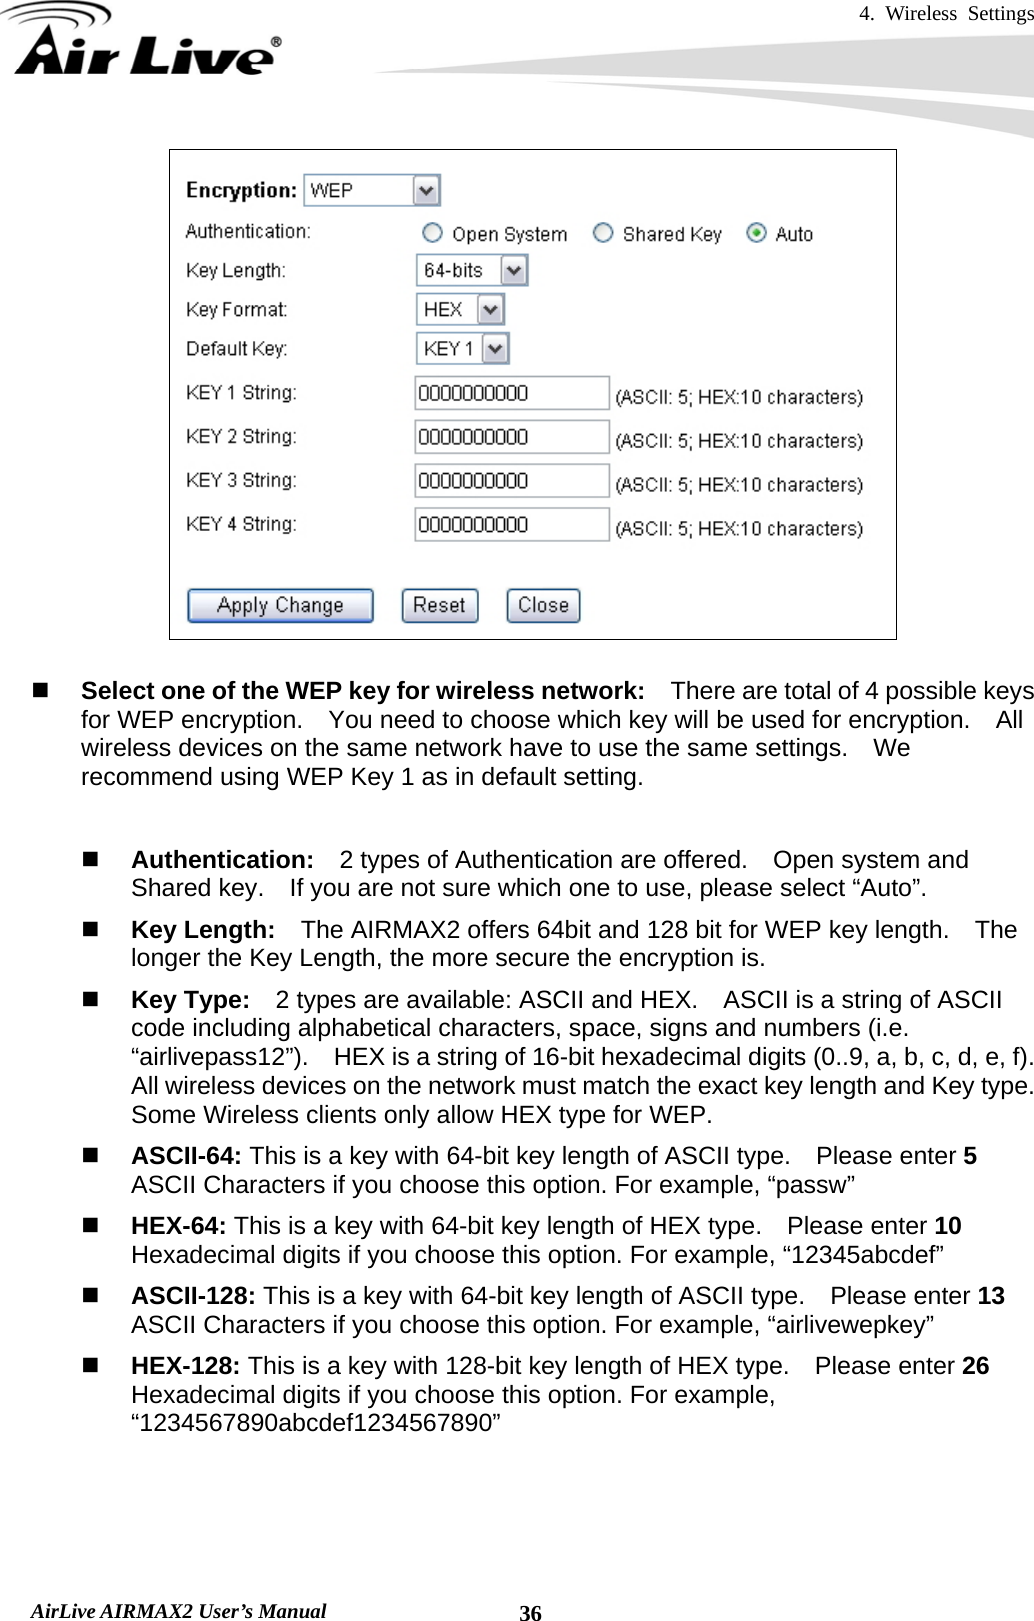 4. Wireless Settings   AirLive AIRMAX2 User’s Manual  36   Select one of the WEP key for wireless network:    There are total of 4 possible keys for WEP encryption.    You need to choose which key will be used for encryption.  All wireless devices on the same network have to use the same settings.    We recommend using WEP Key 1 as in default setting.   Authentication:  2 types of Authentication are offered.    Open system and Shared key.    If you are not sure which one to use, please select “Auto”.  Key Length:    The AIRMAX2 offers 64bit and 128 bit for WEP key length.    The longer the Key Length, the more secure the encryption is.  Key Type:    2 types are available: ASCII and HEX.    ASCII is a string of ASCII code including alphabetical characters, space, signs and numbers (i.e. “airlivepass12”).    HEX is a string of 16-bit hexadecimal digits (0..9, a, b, c, d, e, f).   All wireless devices on the network must match the exact key length and Key type.   Some Wireless clients only allow HEX type for WEP.  ASCII-64: This is a key with 64-bit key length of ASCII type.    Please enter 5 ASCII Characters if you choose this option. For example, “passw”  HEX-64: This is a key with 64-bit key length of HEX type.    Please enter 10 Hexadecimal digits if you choose this option. For example, “12345abcdef”  ASCII-128: This is a key with 64-bit key length of ASCII type.    Please enter 13 ASCII Characters if you choose this option. For example, “airlivewepkey”  HEX-128: This is a key with 128-bit key length of HEX type.    Please enter 26 Hexadecimal digits if you choose this option. For example, “1234567890abcdef1234567890”   